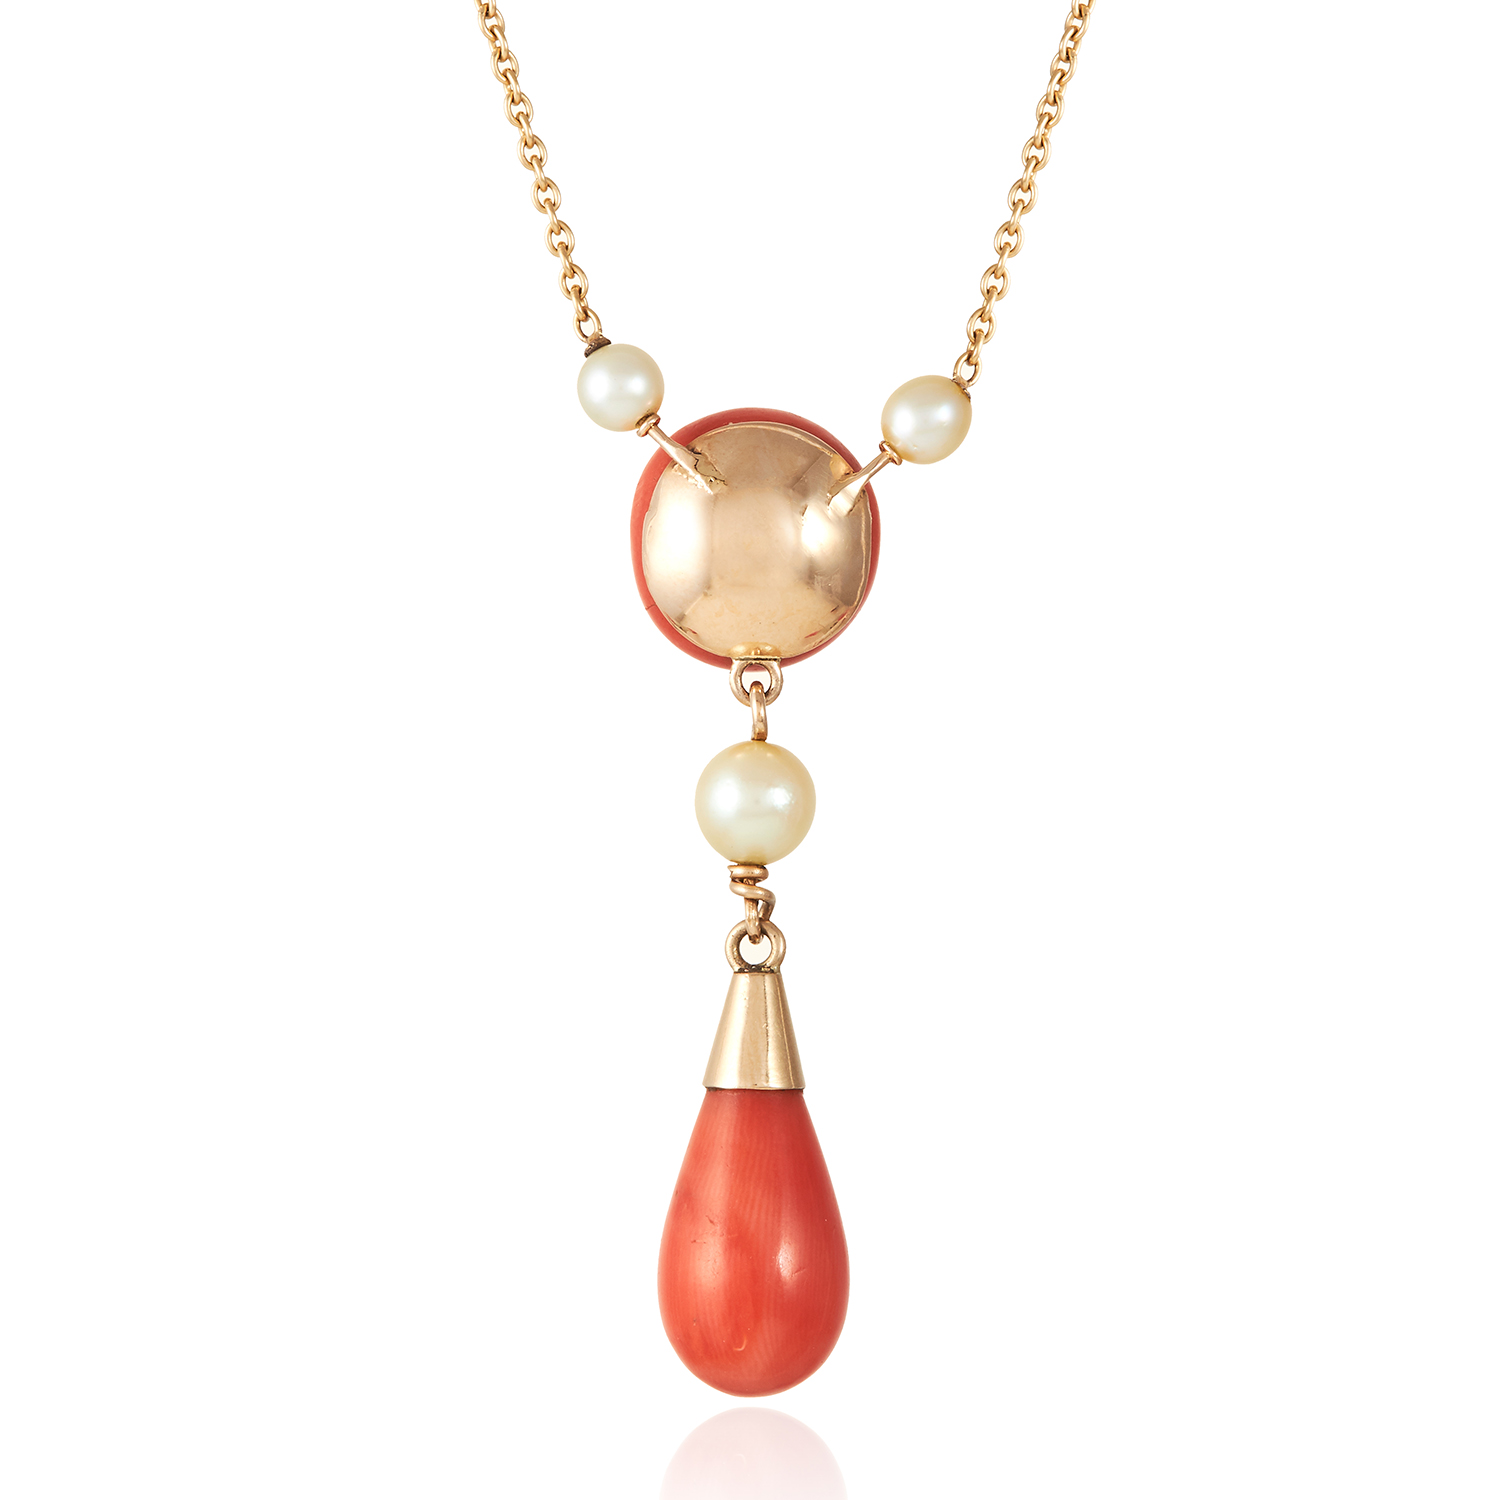 AN ANTIQUE CORAL AND PEARL NECKLACE in yellow gold, the large polished coral beads accented by